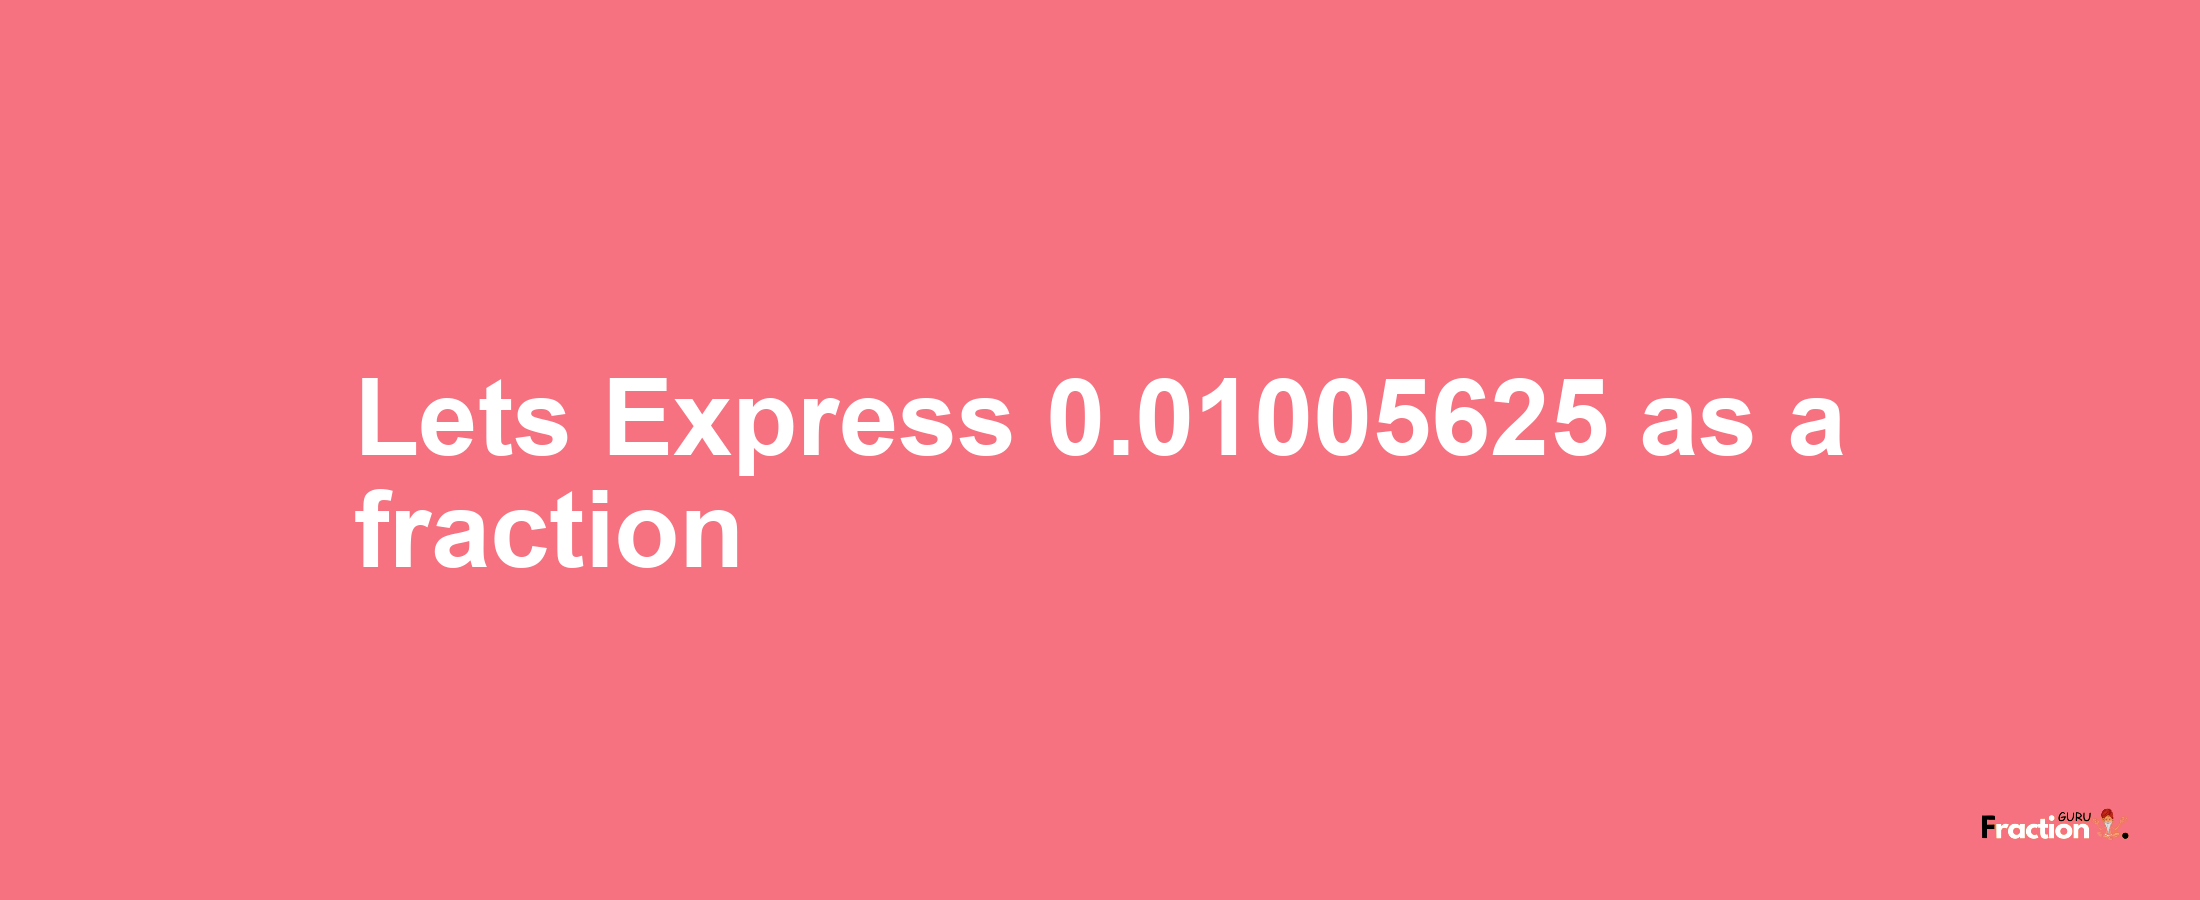 Lets Express 0.01005625 as afraction